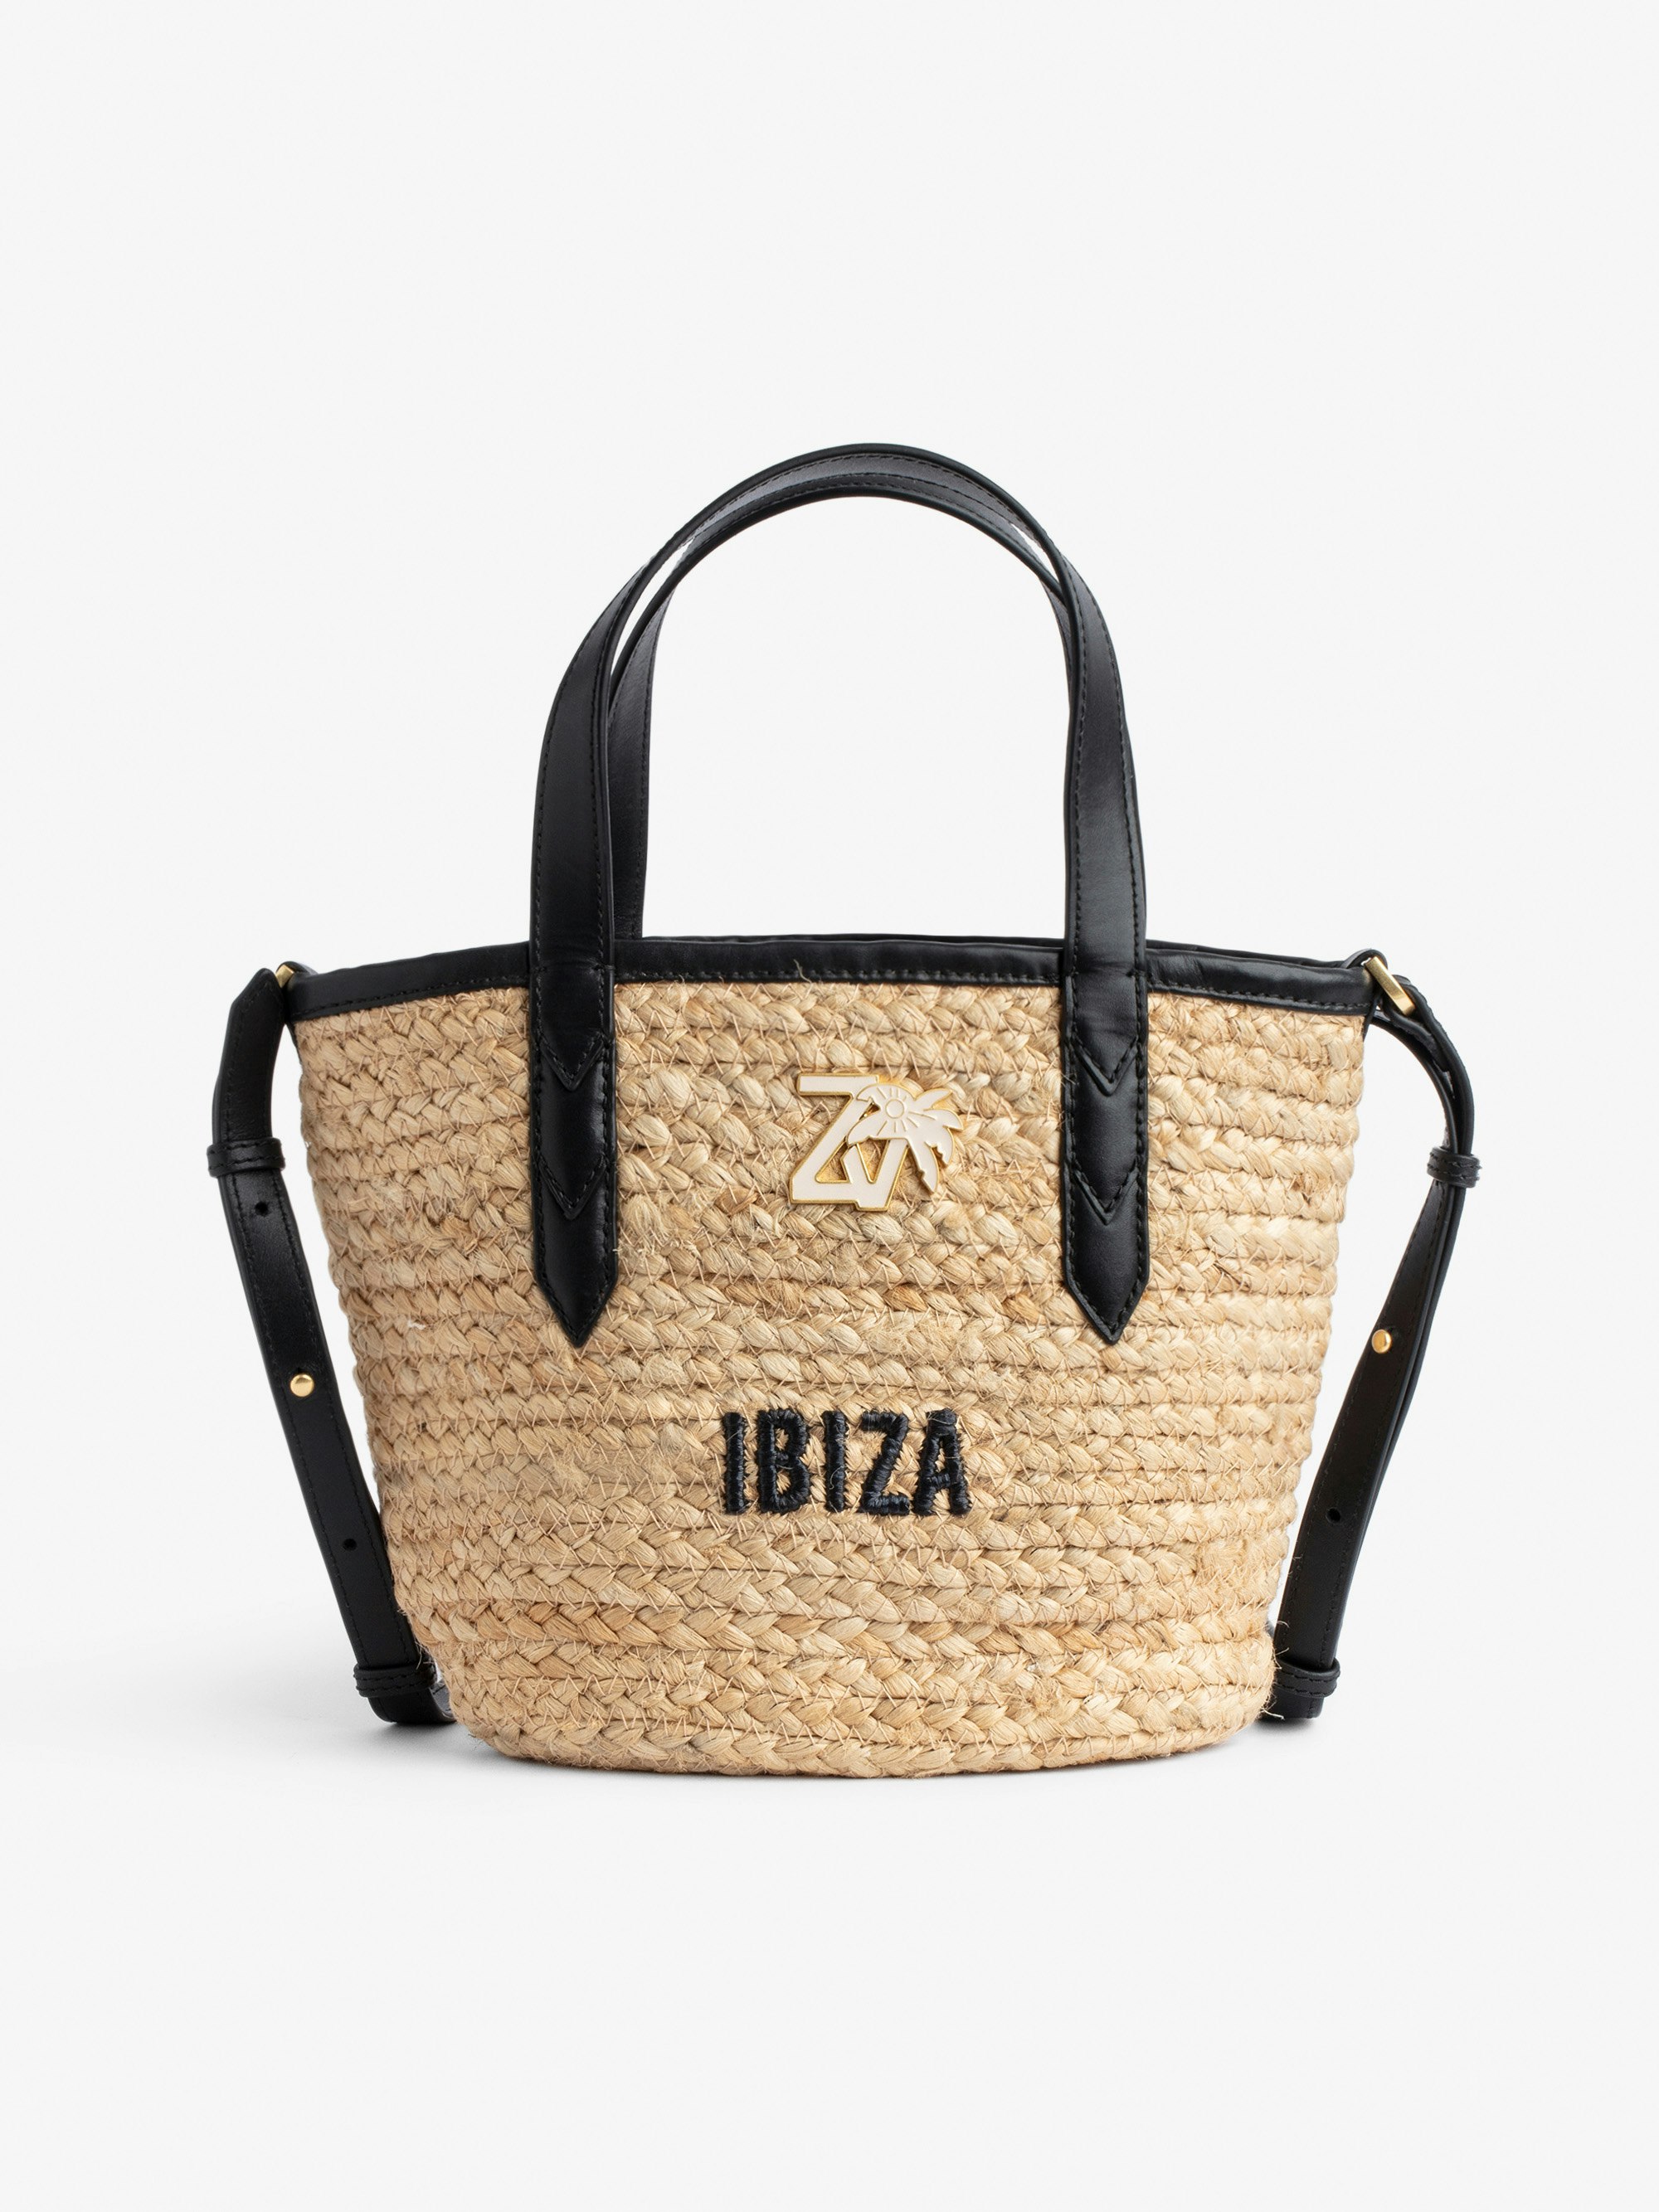 Le Baby Beach Bag - Women's straw bag with black leather shoulder strap, "Ibiza" embroidery and ZV charm